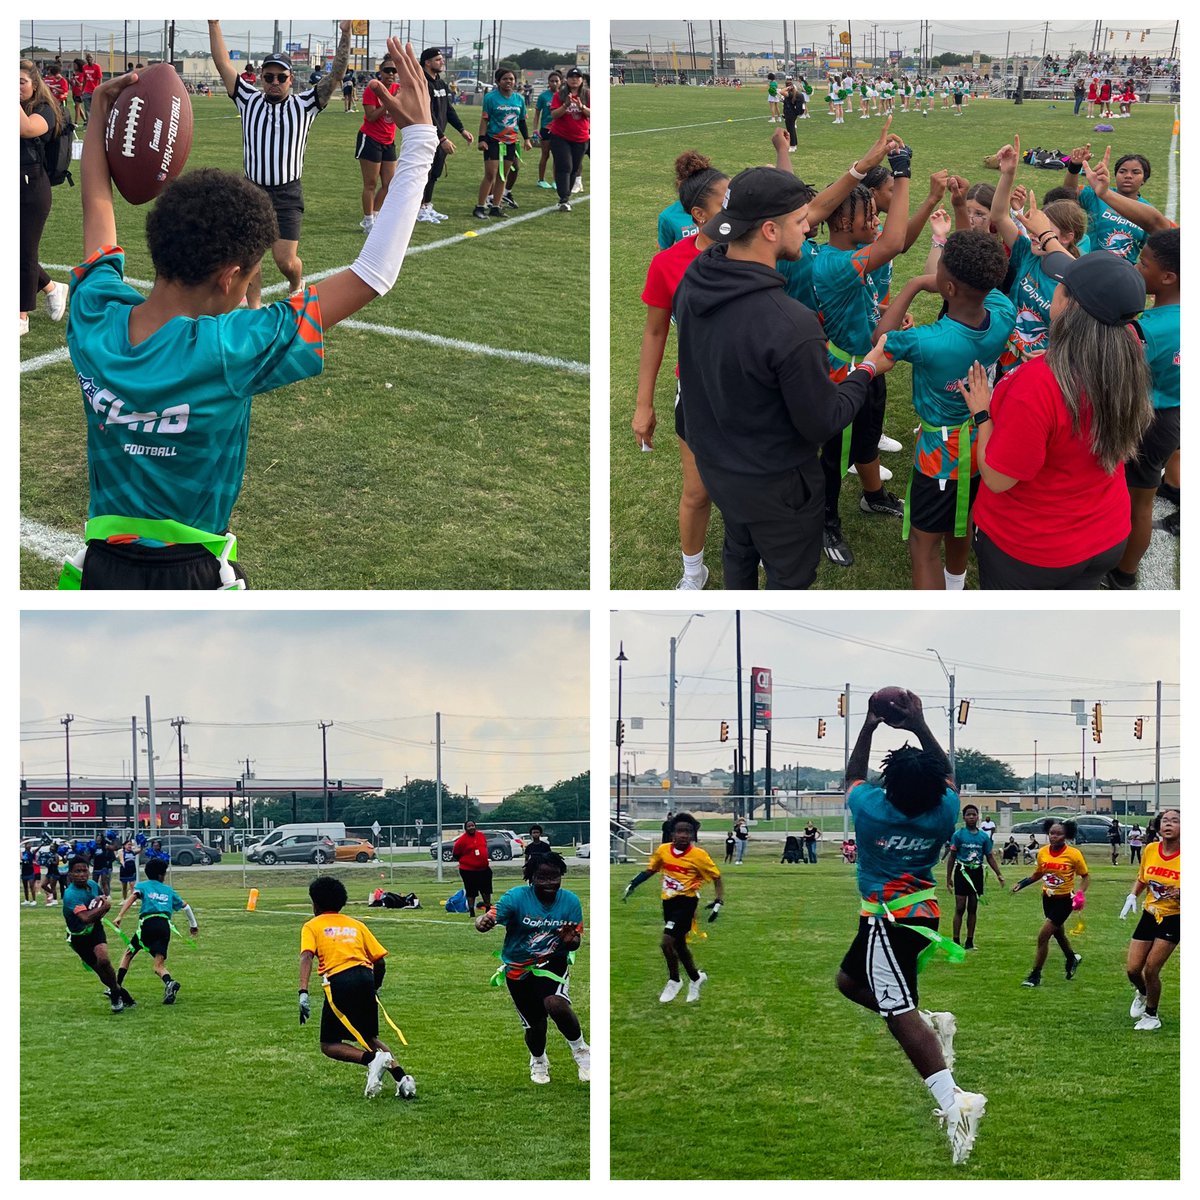 Tonight concluded our 6th grade Flag Football league. Our Jaguars fell short today, however they have gained valuable experience about the game. We thank all of the athletes & parents for their commitment for the season! @JISD_ATHLETICS @JudsonISD @KayoneCarter @Coach_TLara